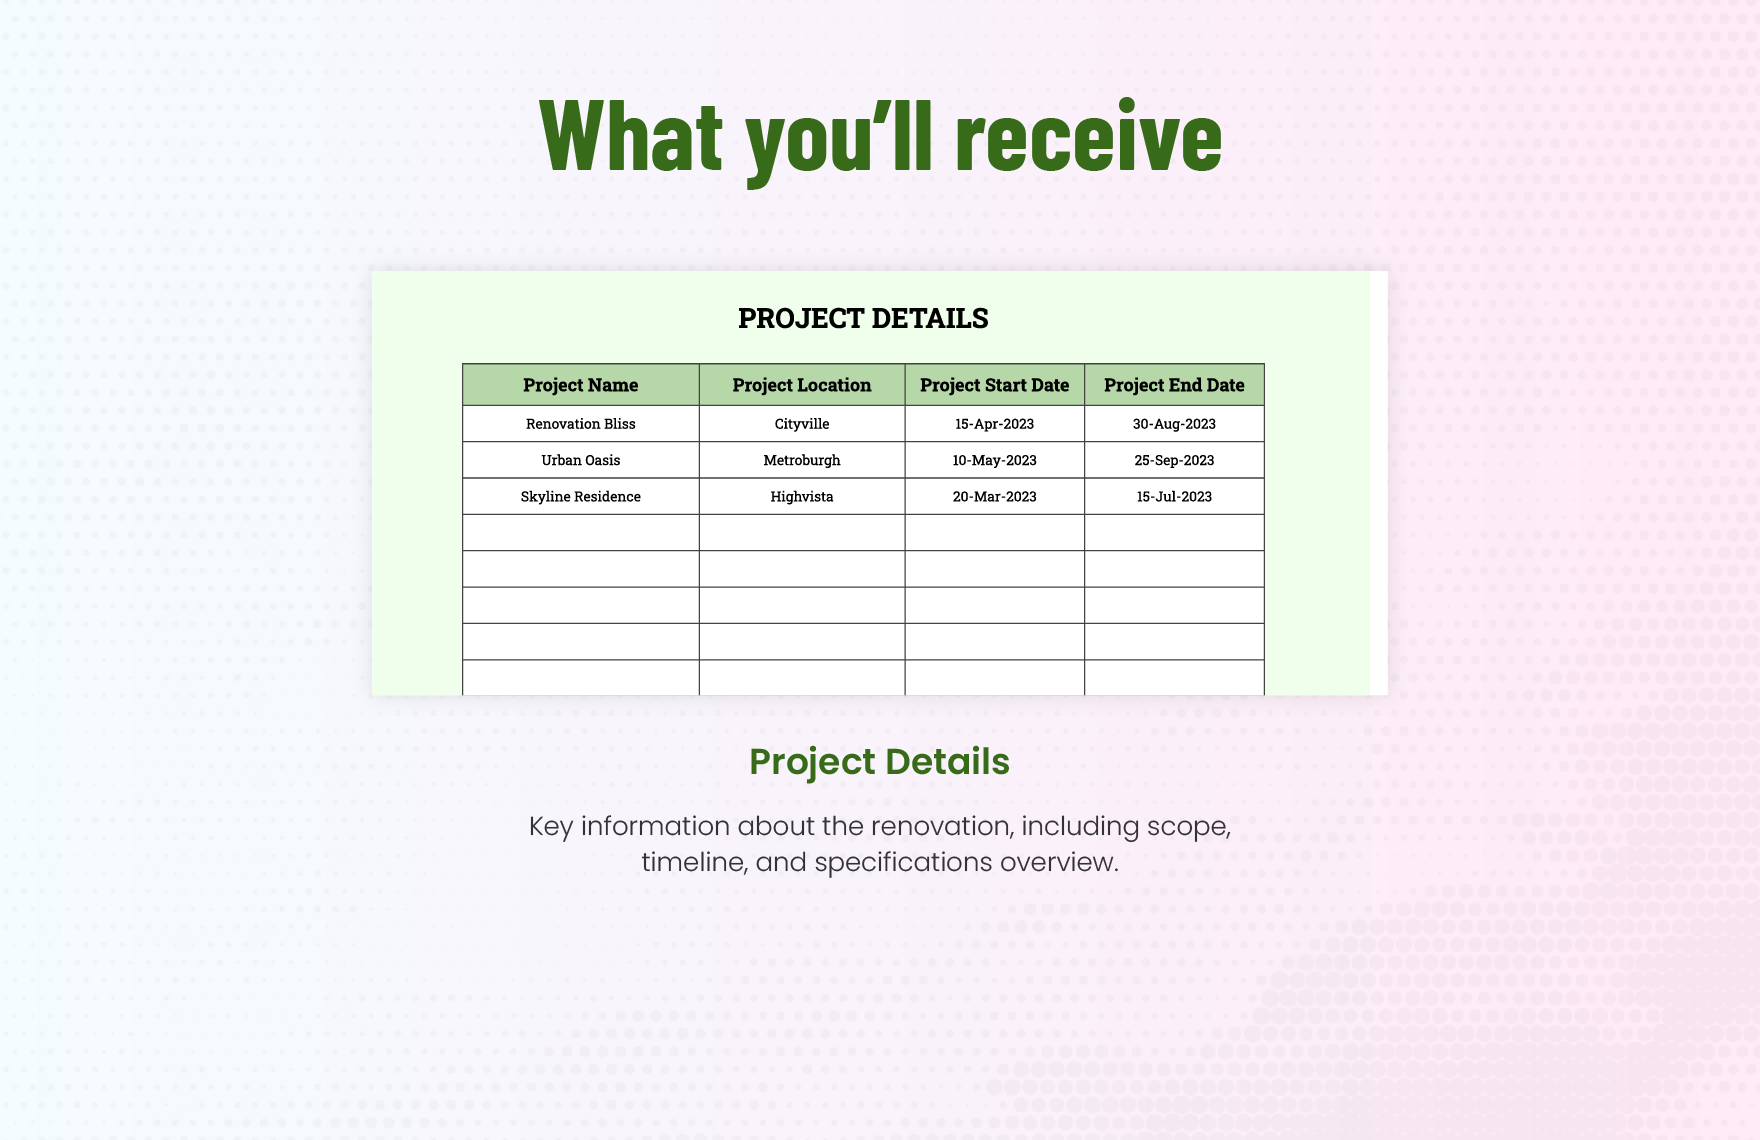 Home Renovation Project Budget Template